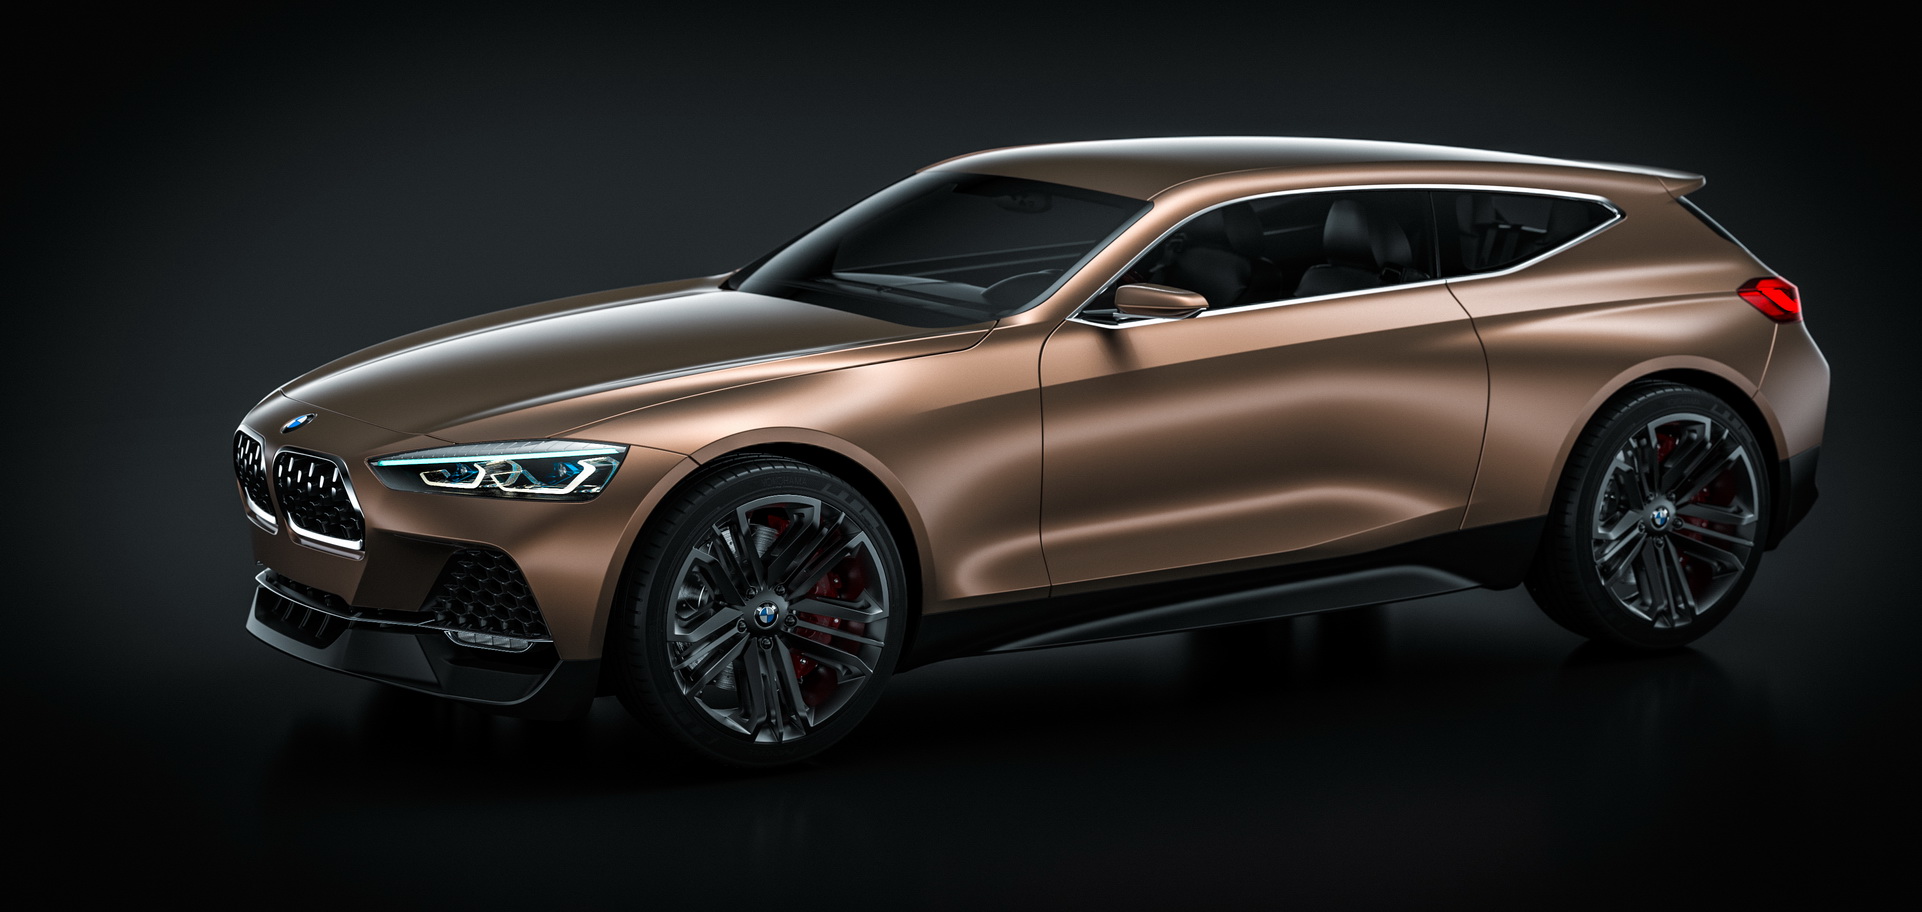 What If BMW Made This Scirocco-Style 1 Or 2 Series Shooting Brake? We’d ...